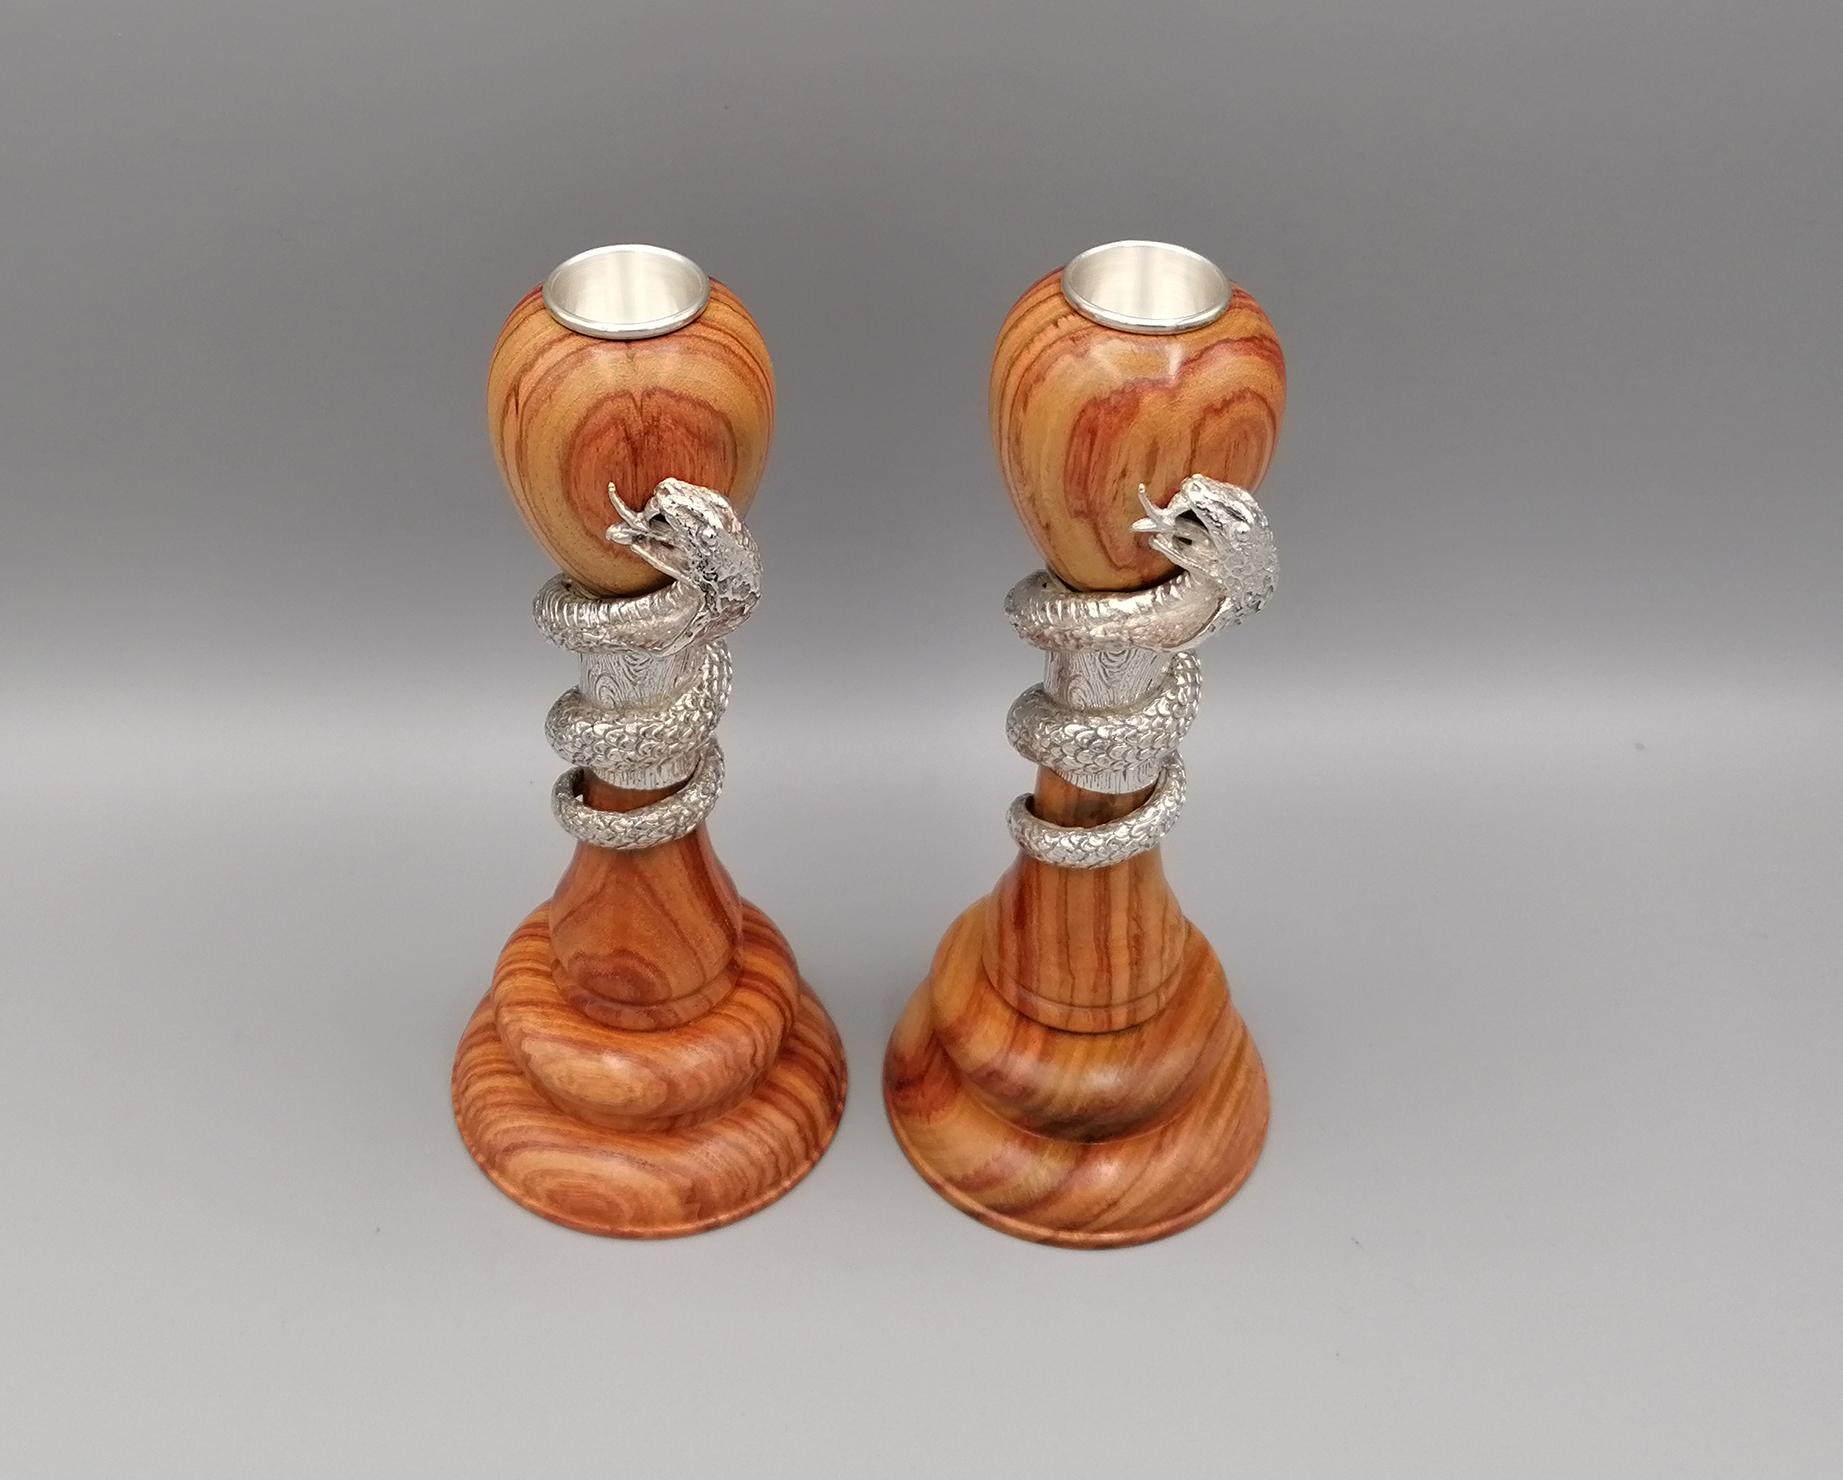 Pair of 925 silver candlesticks, depicting two snakes twisted around a wood stem.
The snake and the seat for the candle are in 925 silver while the stem, the base and the candleholder are in wood
Italian silverware, already with a centuries-old